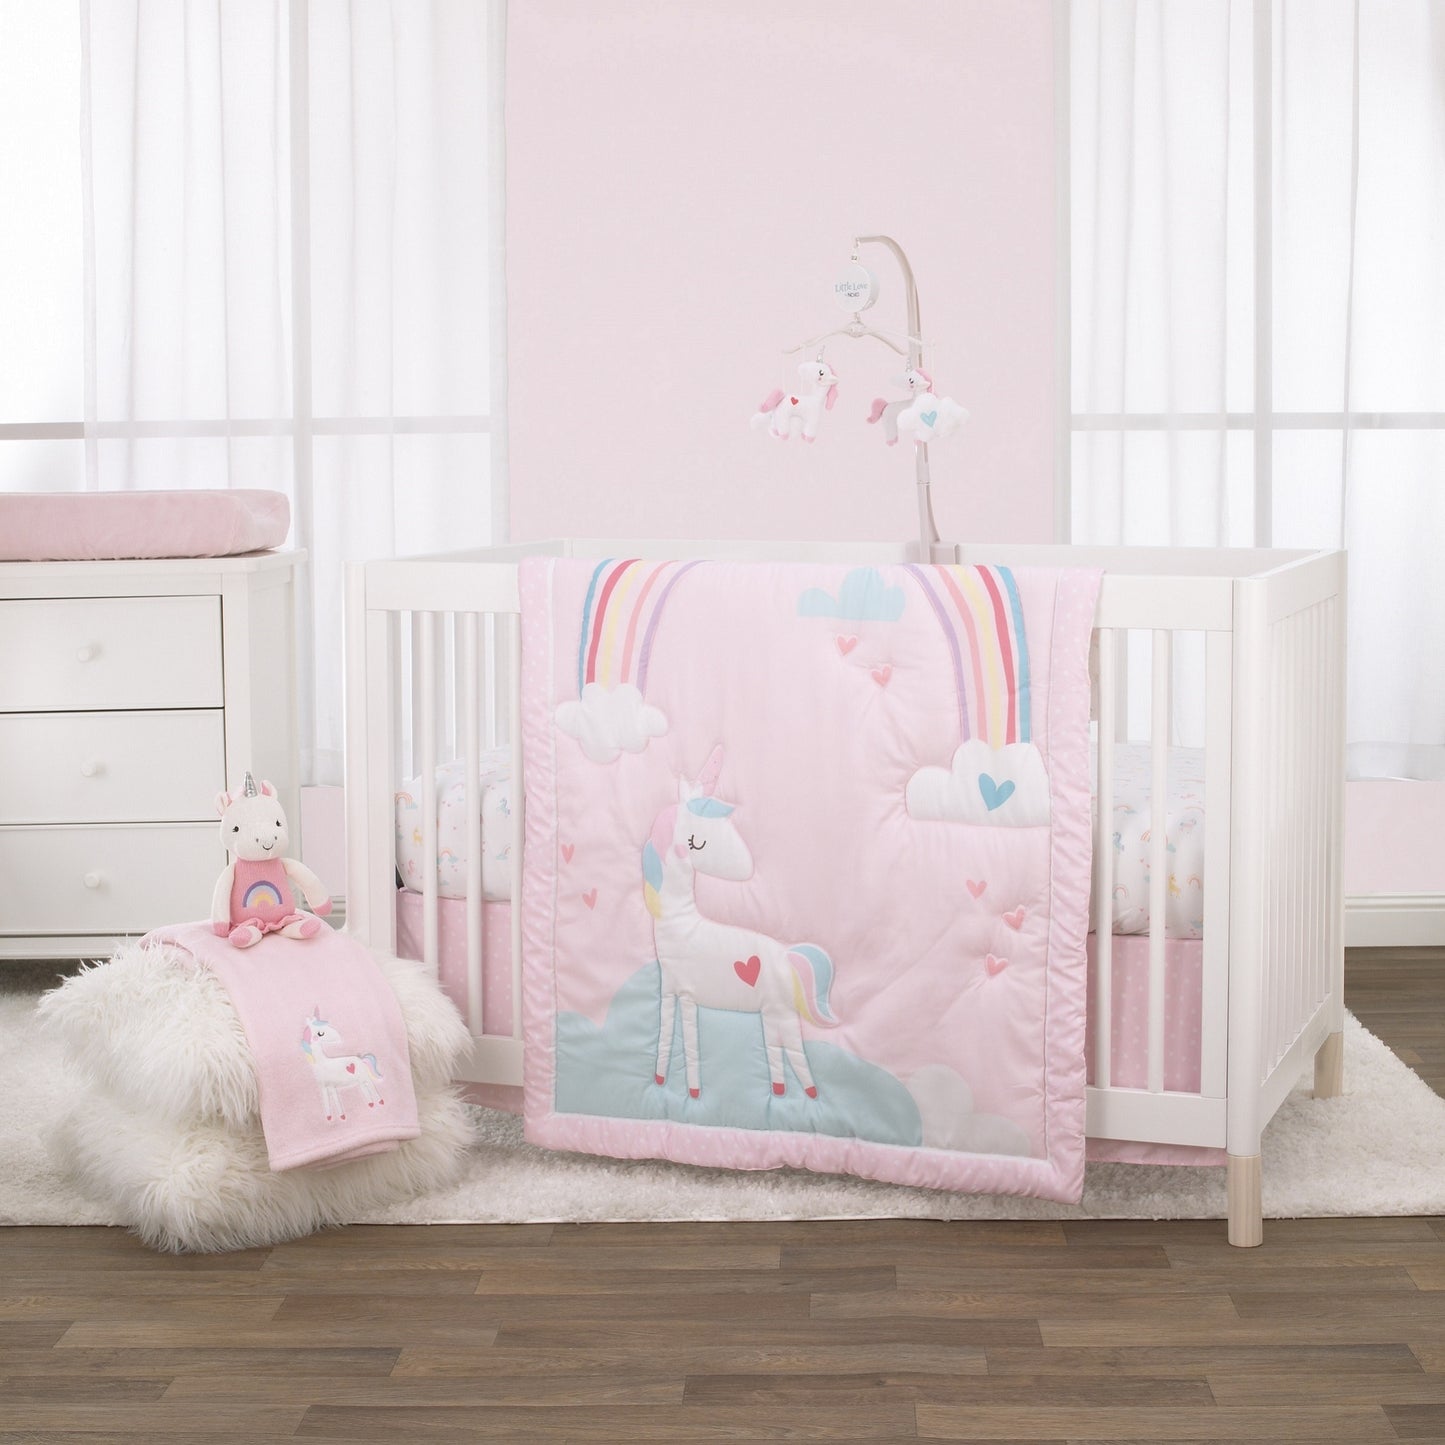 Little Love by NoJo Rainbow Unicorn Aqua and White Musical Mobile with Unicorns and Clouds